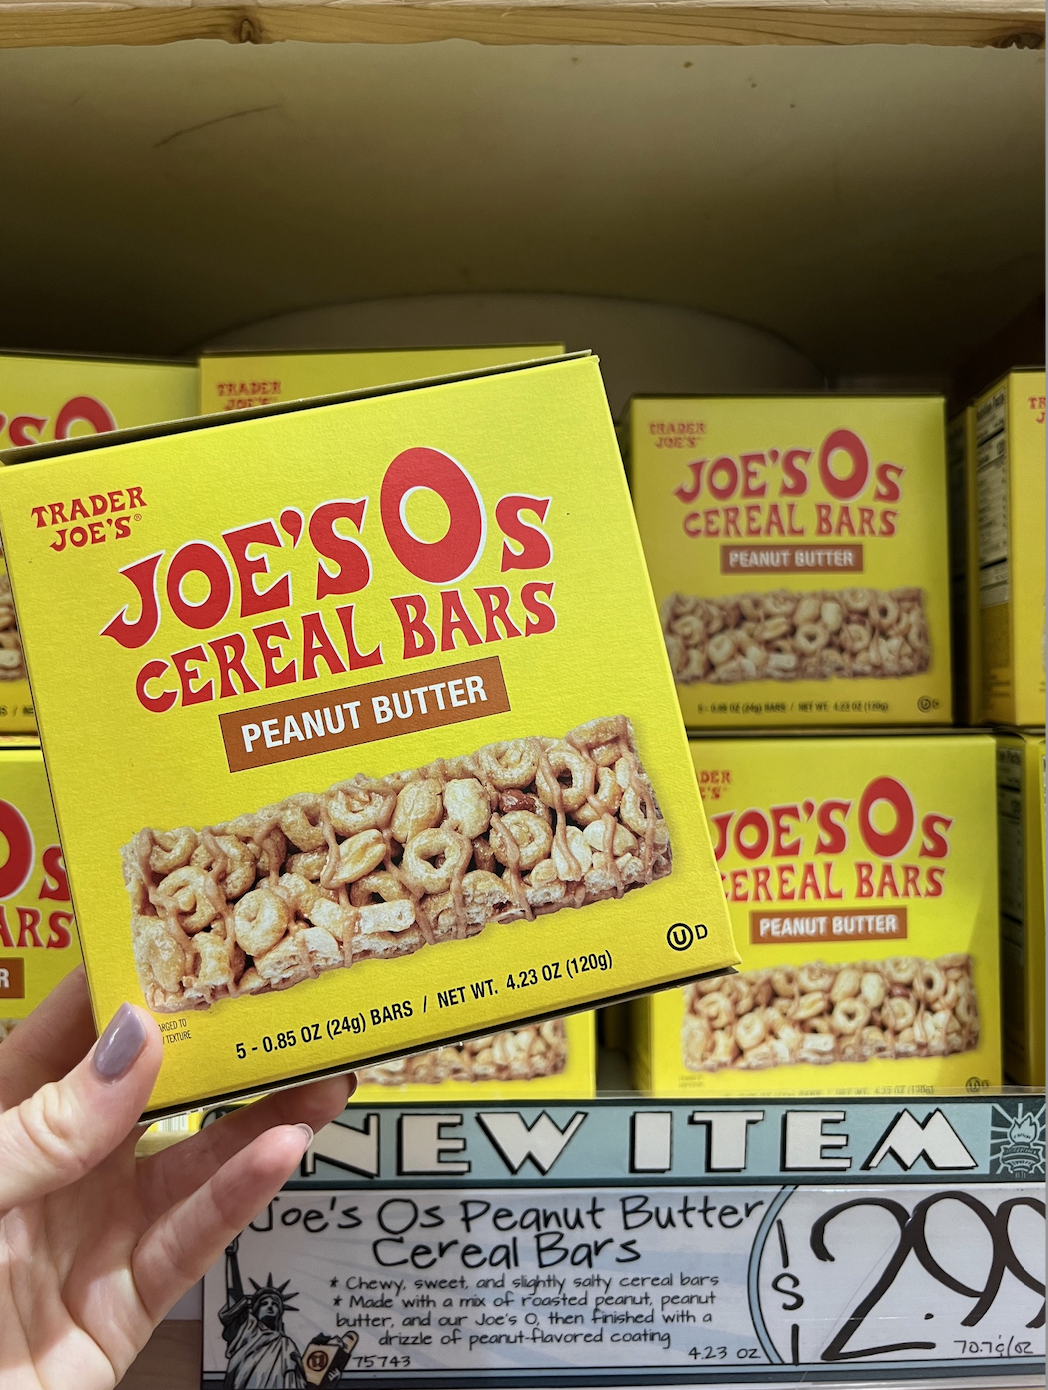 Hand holding a box of Joe&#x27;s O&#x27;s Peanut Butter Cereal Bars at a store with price tag shown